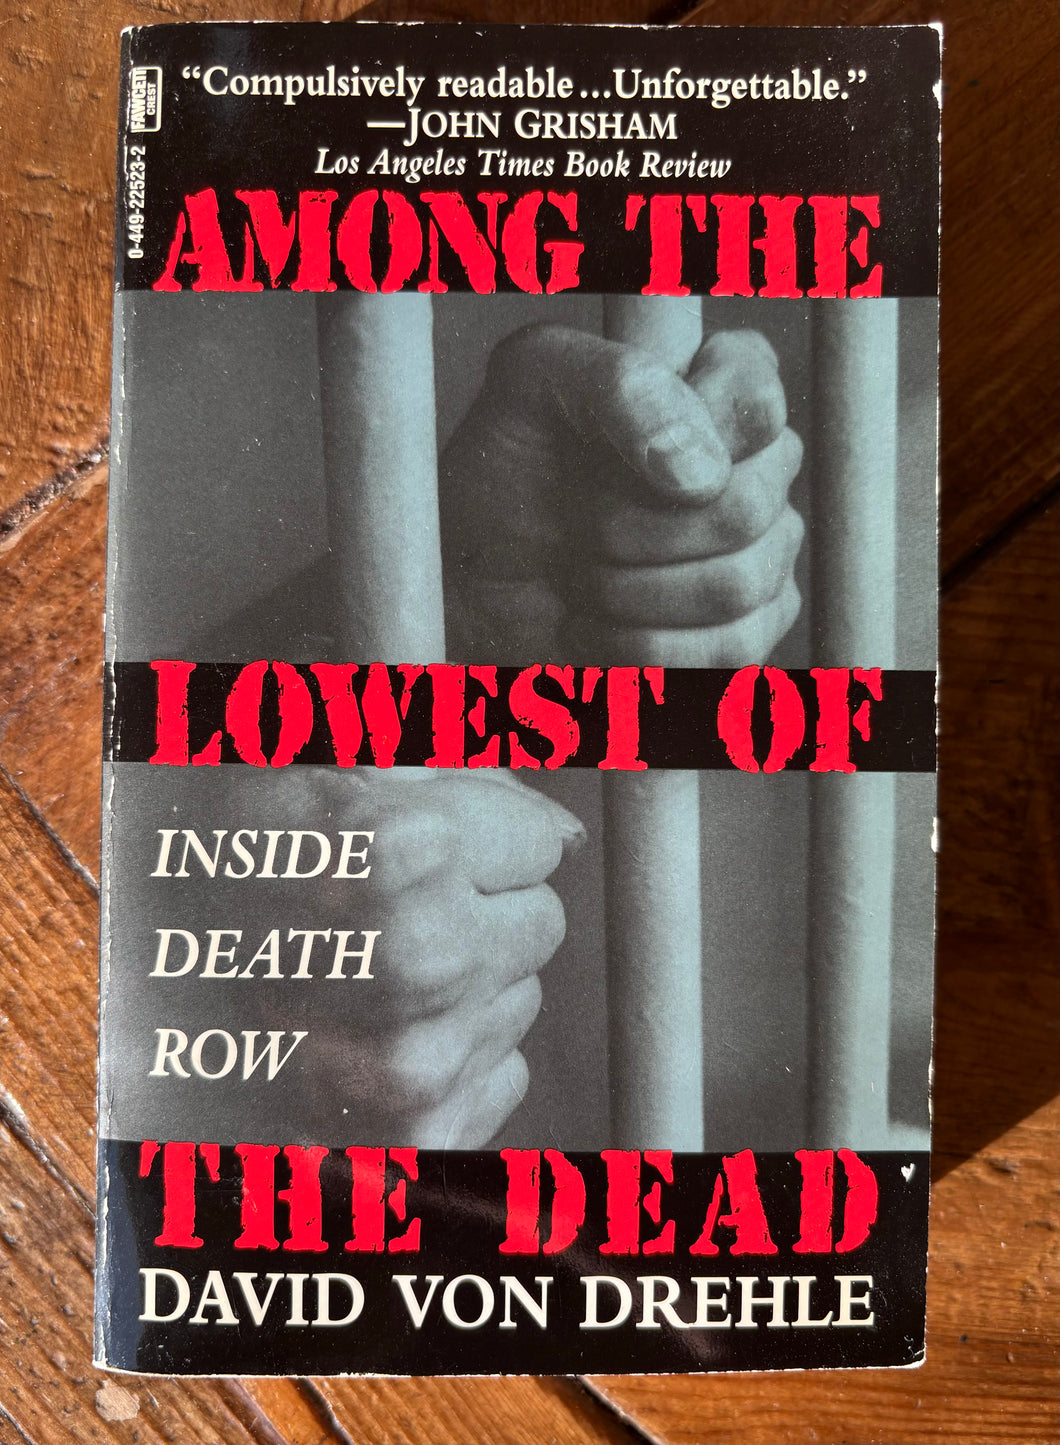 Among The Lowest Of The Dead: Inside Death Row